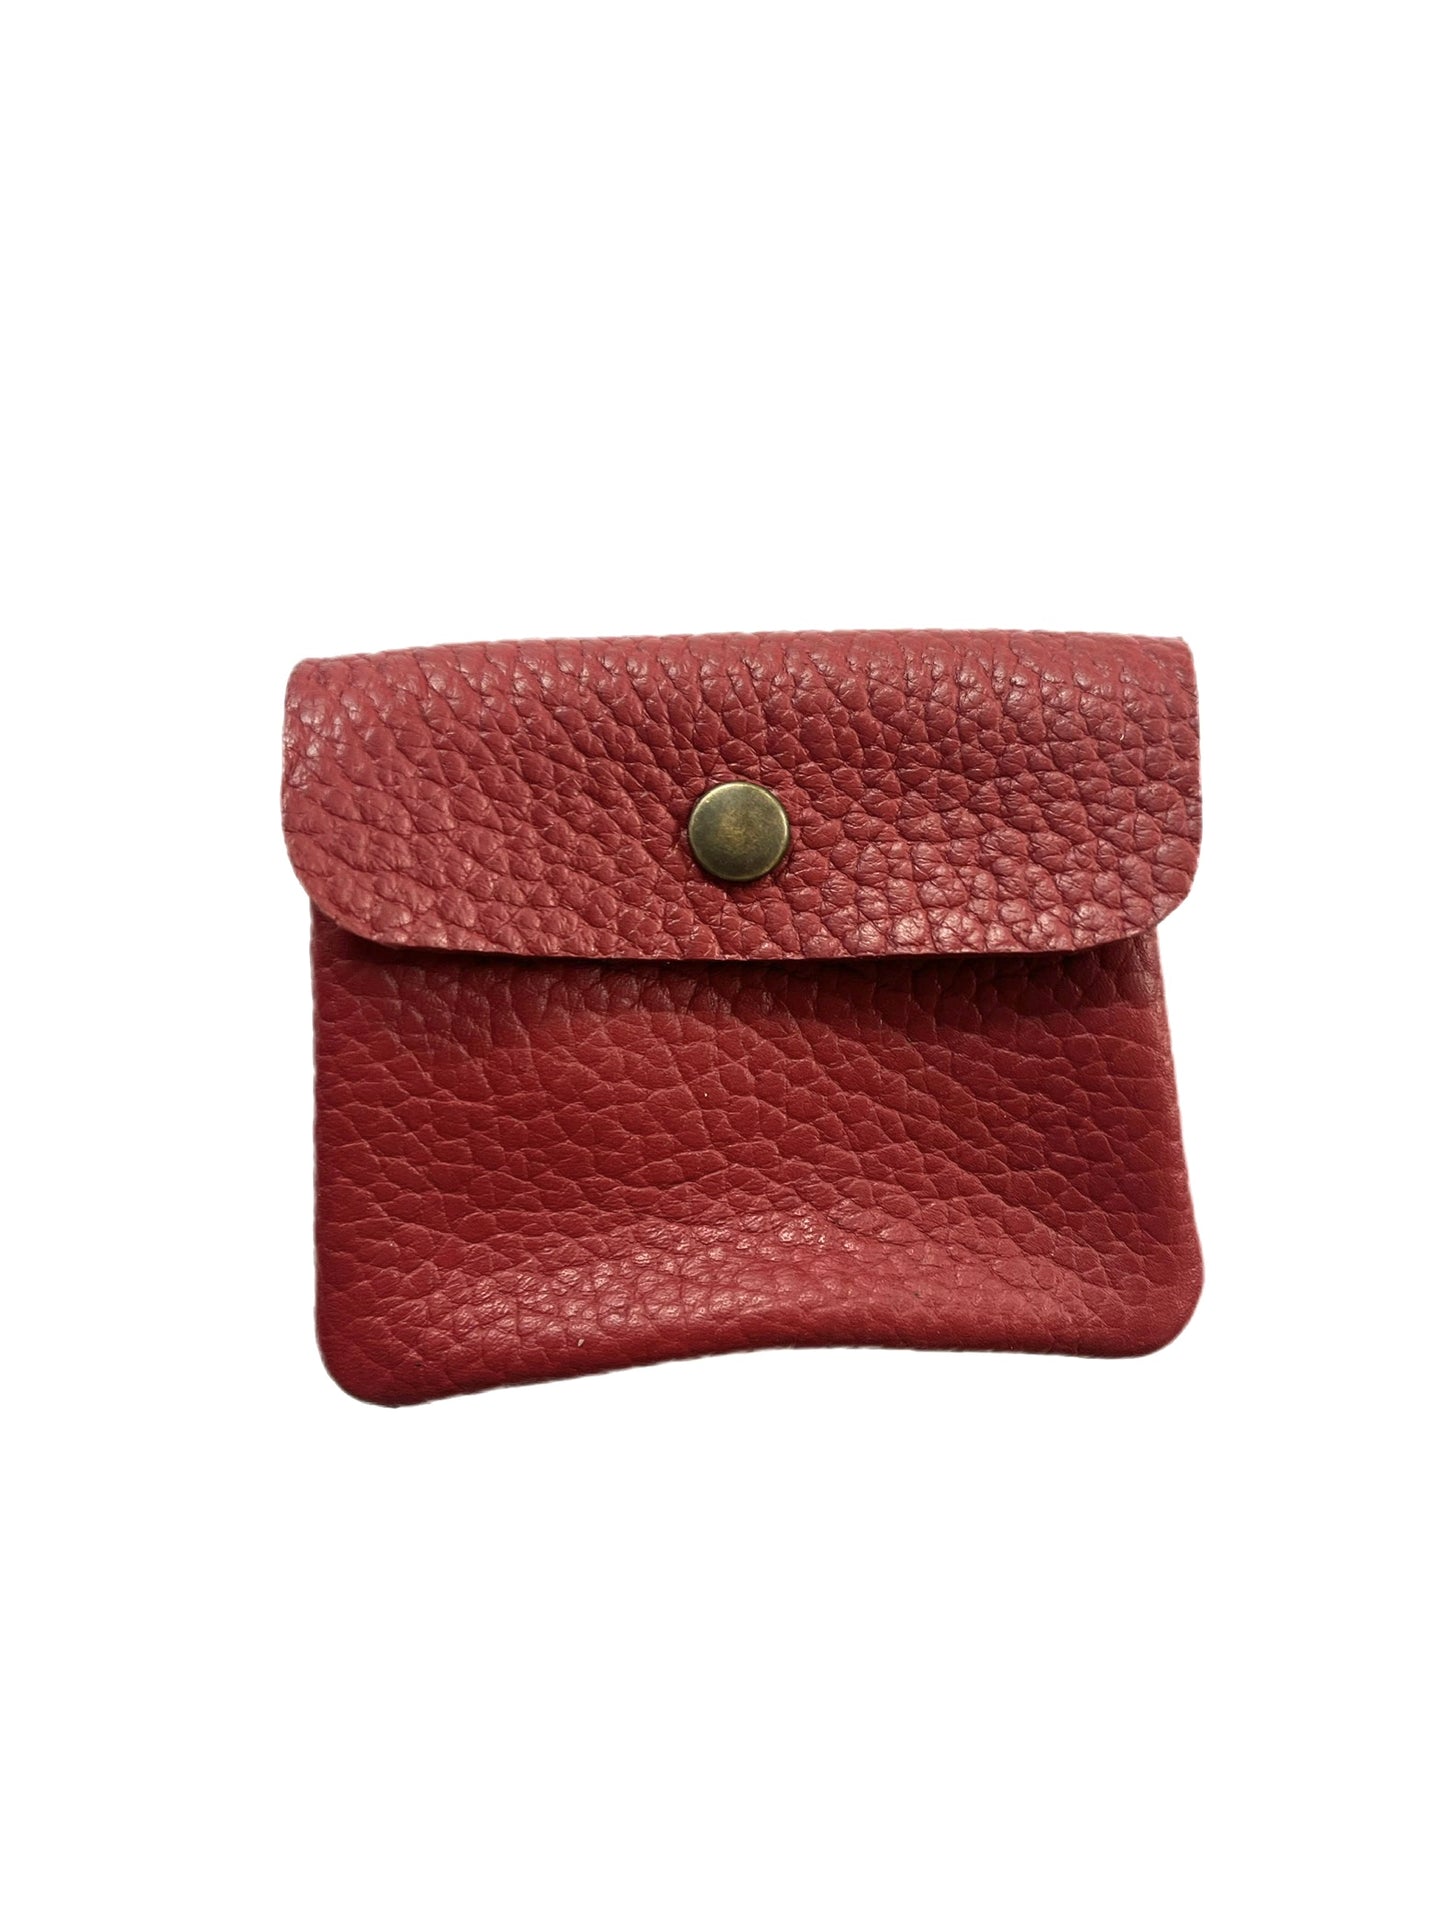 Small Leather Wallet with zipper